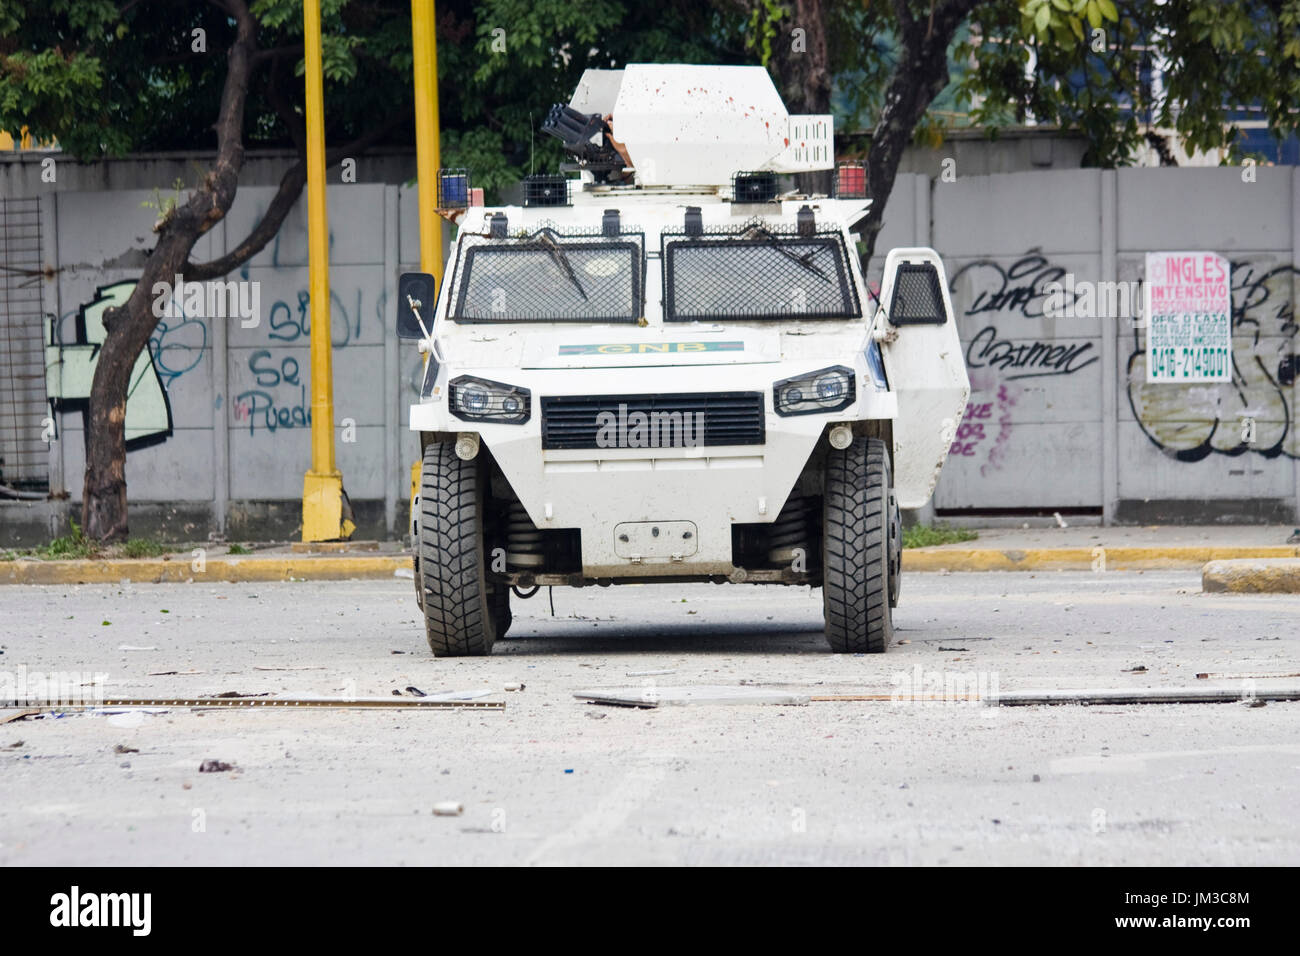 A Norinco VN-4 armored vehicle during a protest in Caracas Stock Photo